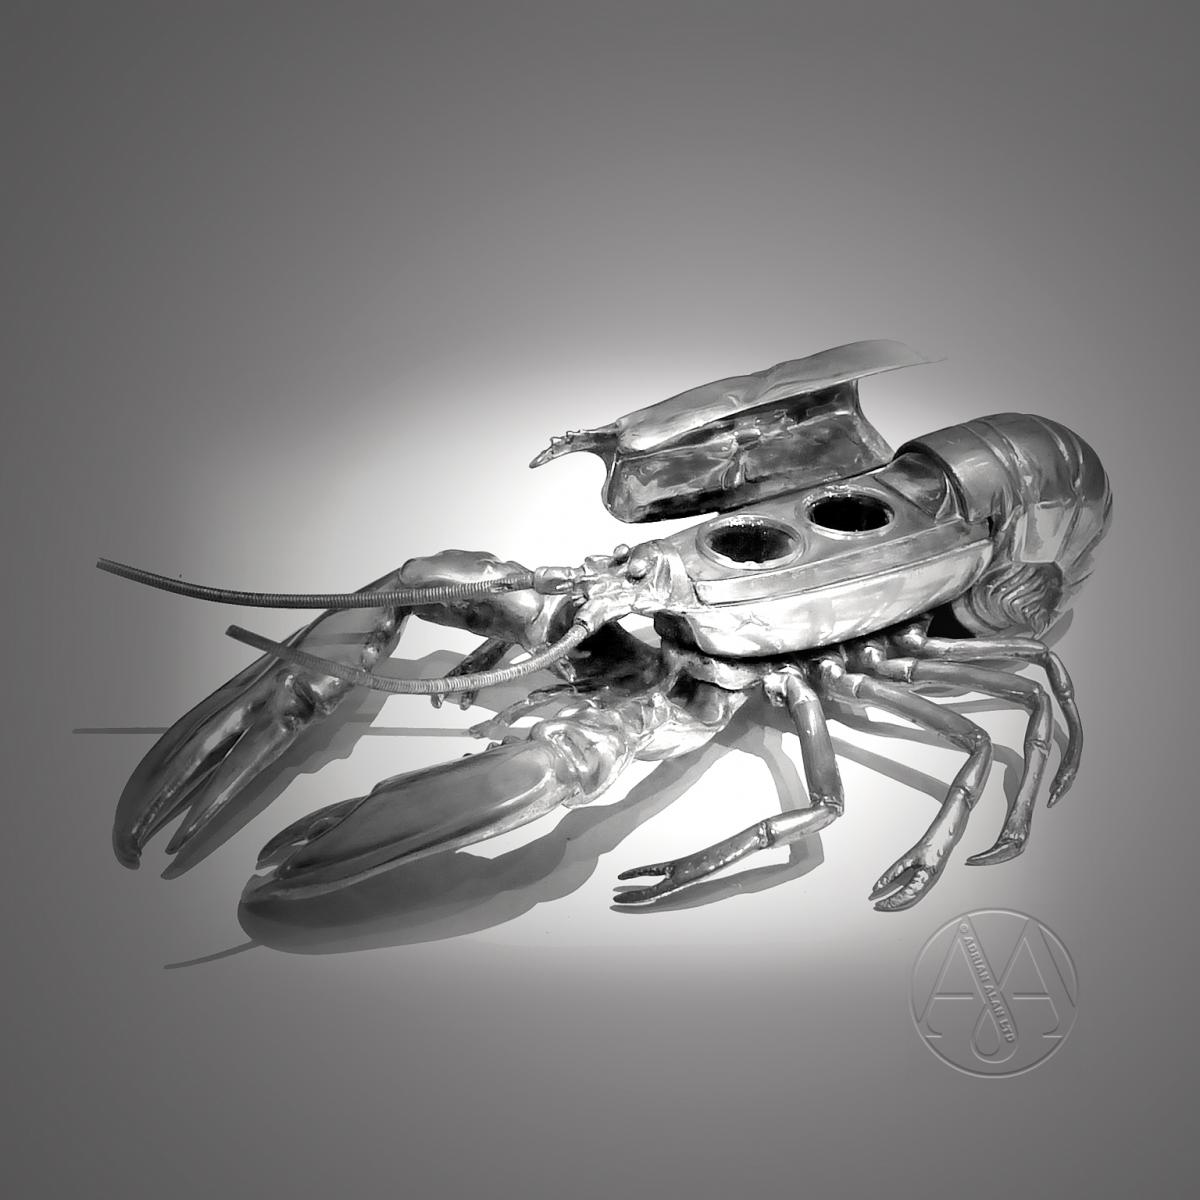 Victorian Silver Plated Desk Stand Modelled as a Lobster